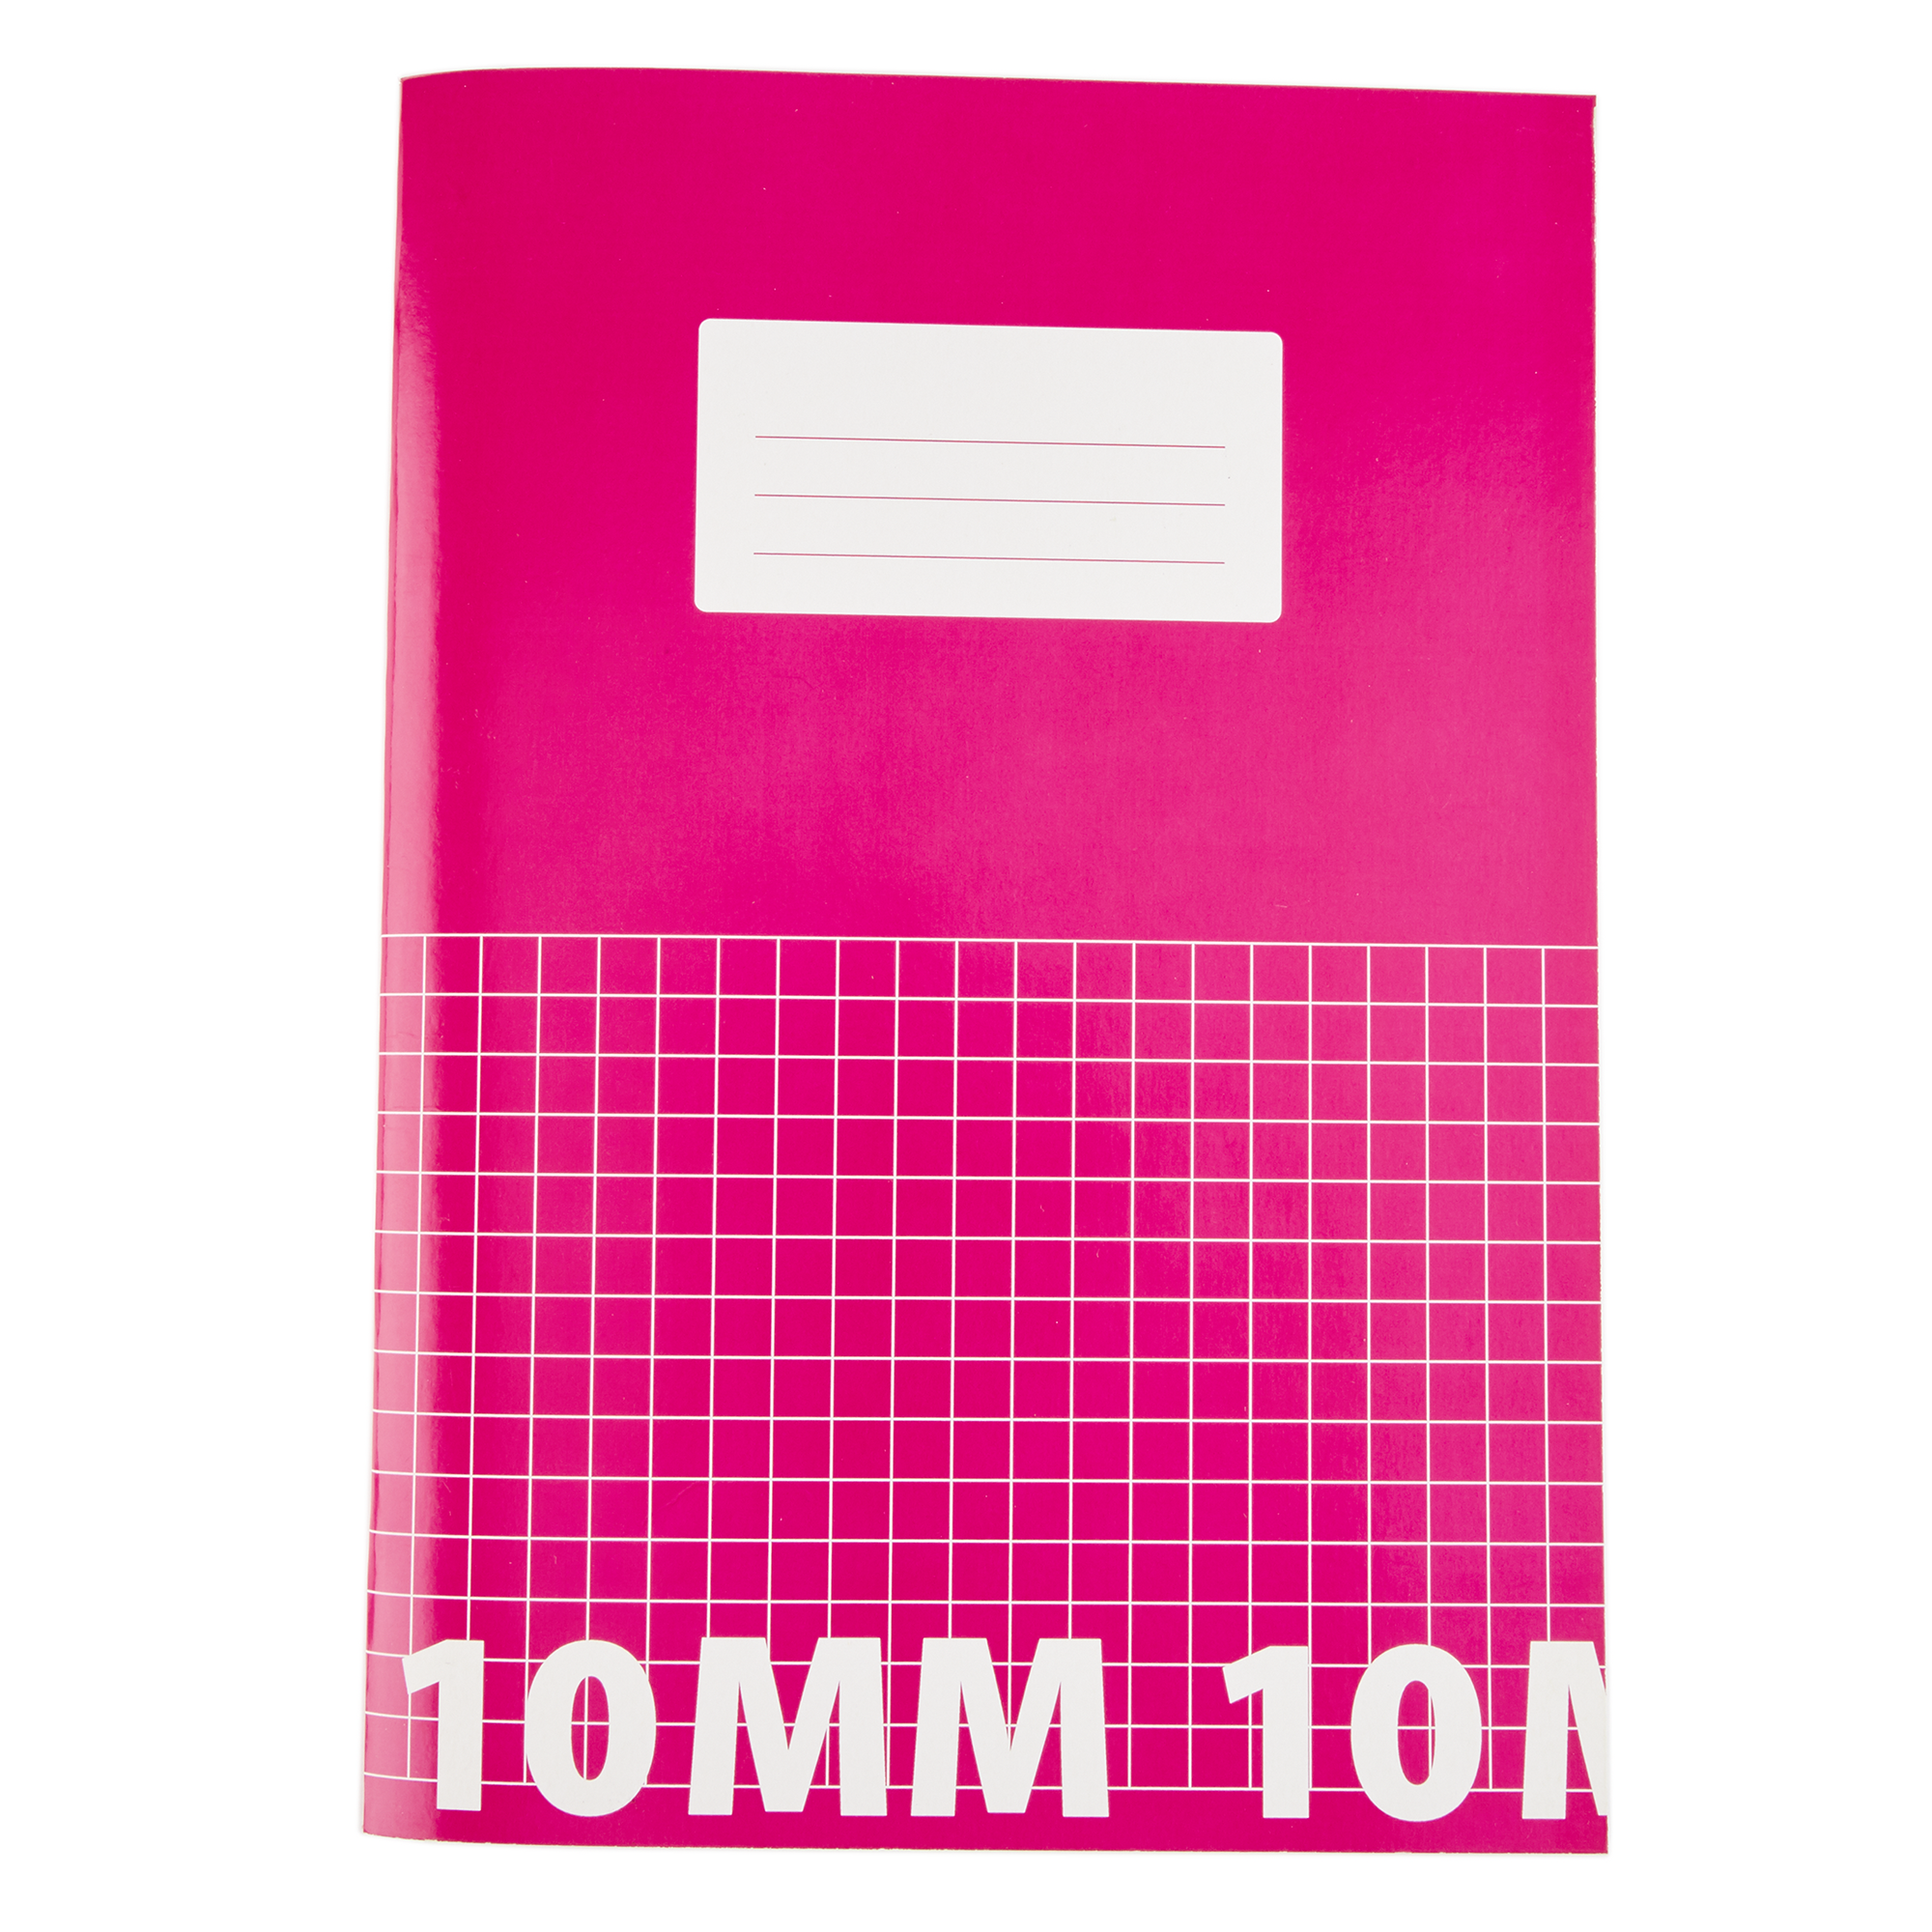 Cmates A4 Glossy Ex Book Pink 10mm Sq